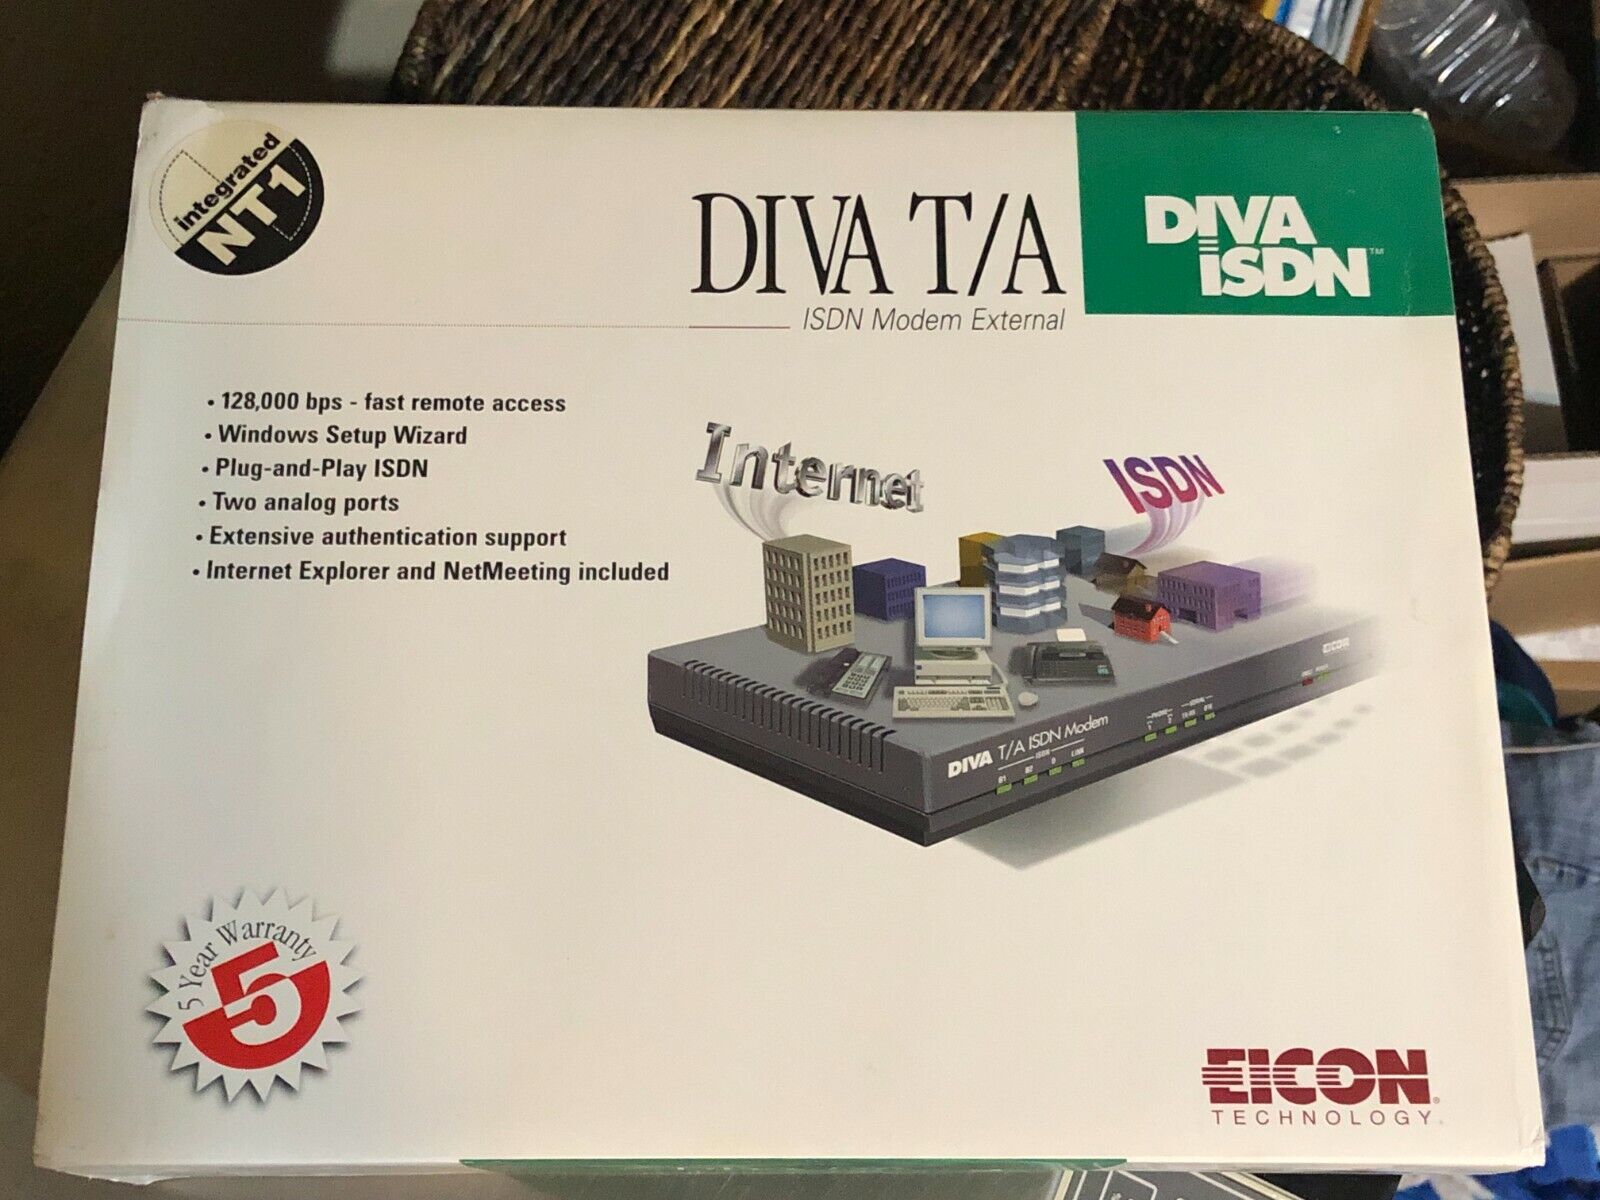  DIVA T/A Eicon ISDN External Modem 128,000 bps Setup Wizard, 2 ports, remote 